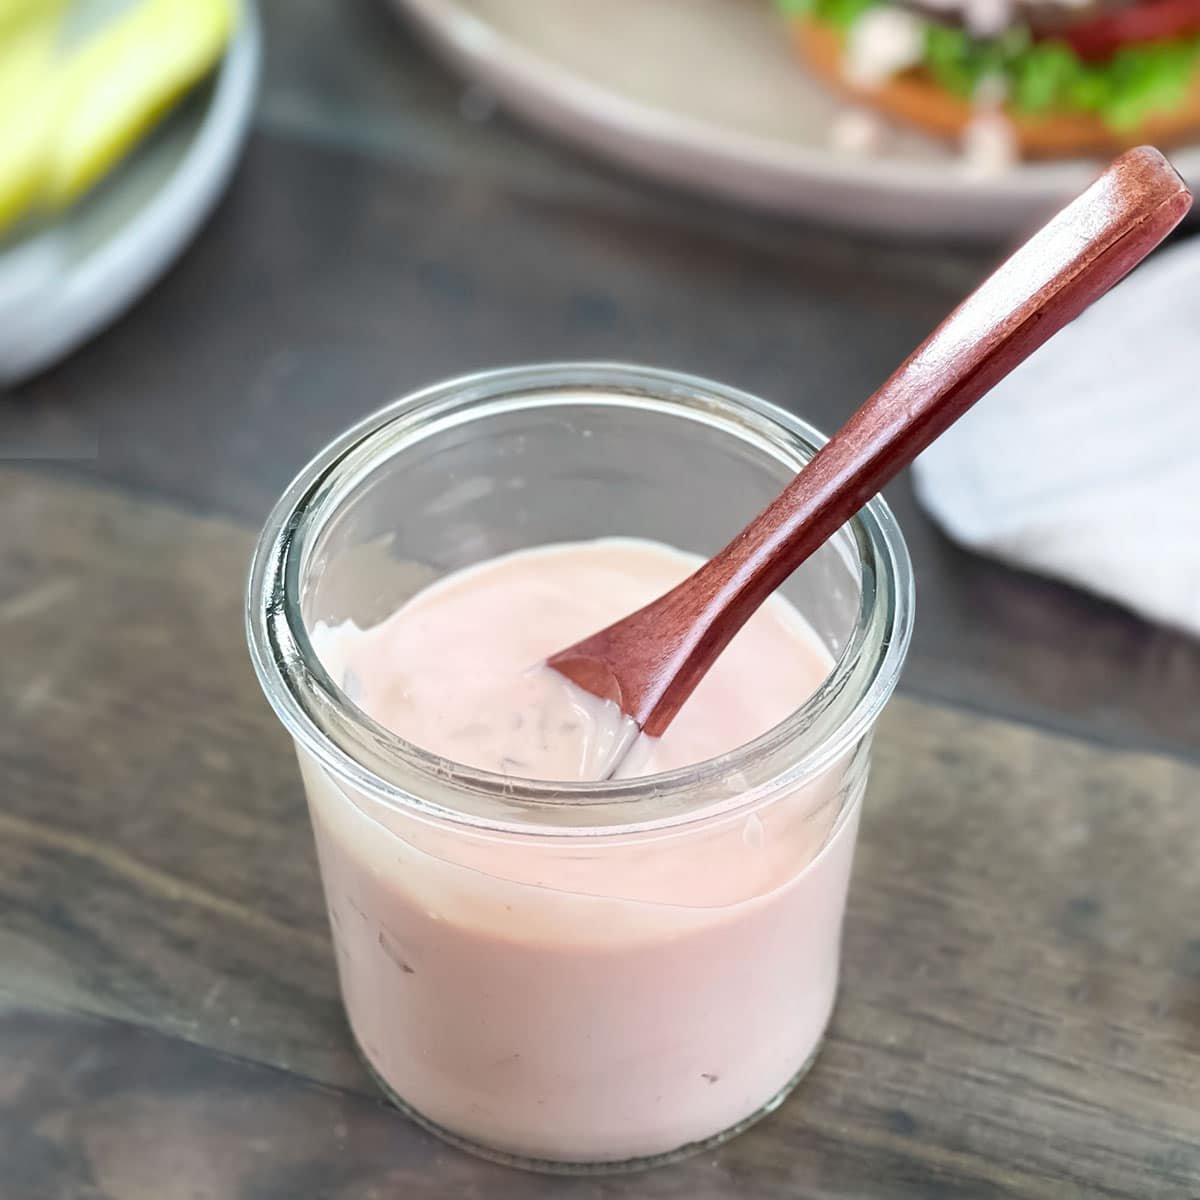 Pinkish burger sauce in a glass jar with a small wooden spoon.